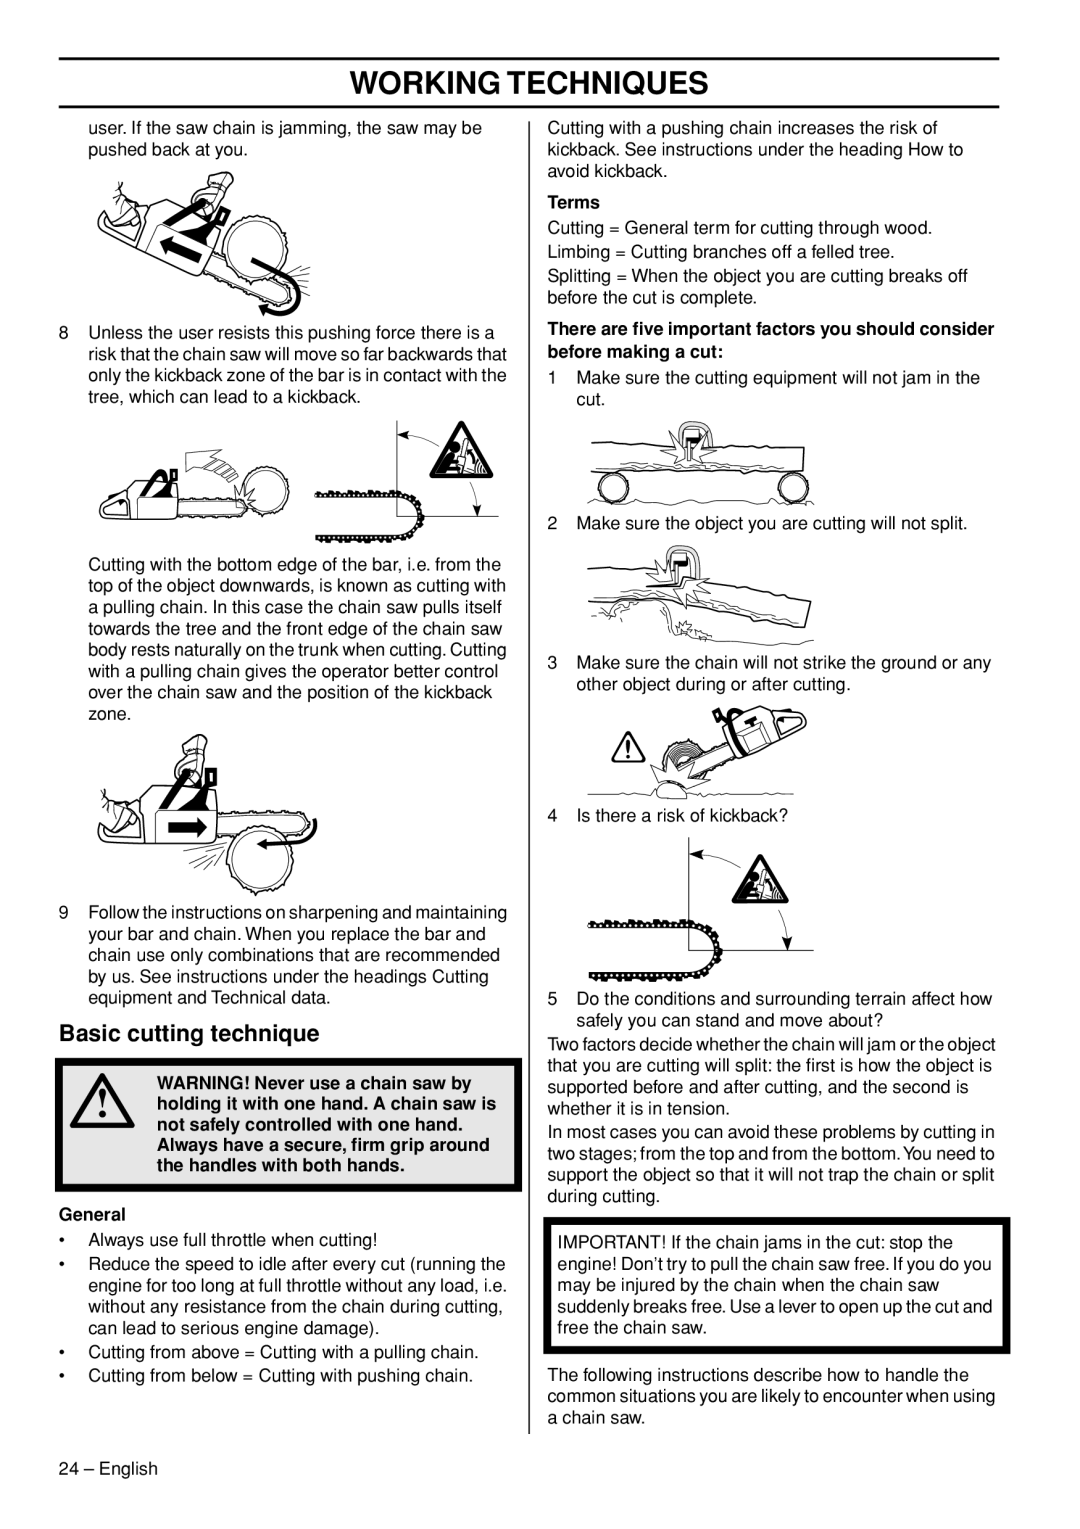 Husqvarna 576 XPG manual Basic cutting technique, Working Techniques, WARNING! Never use a chain saw by, General, Terms 